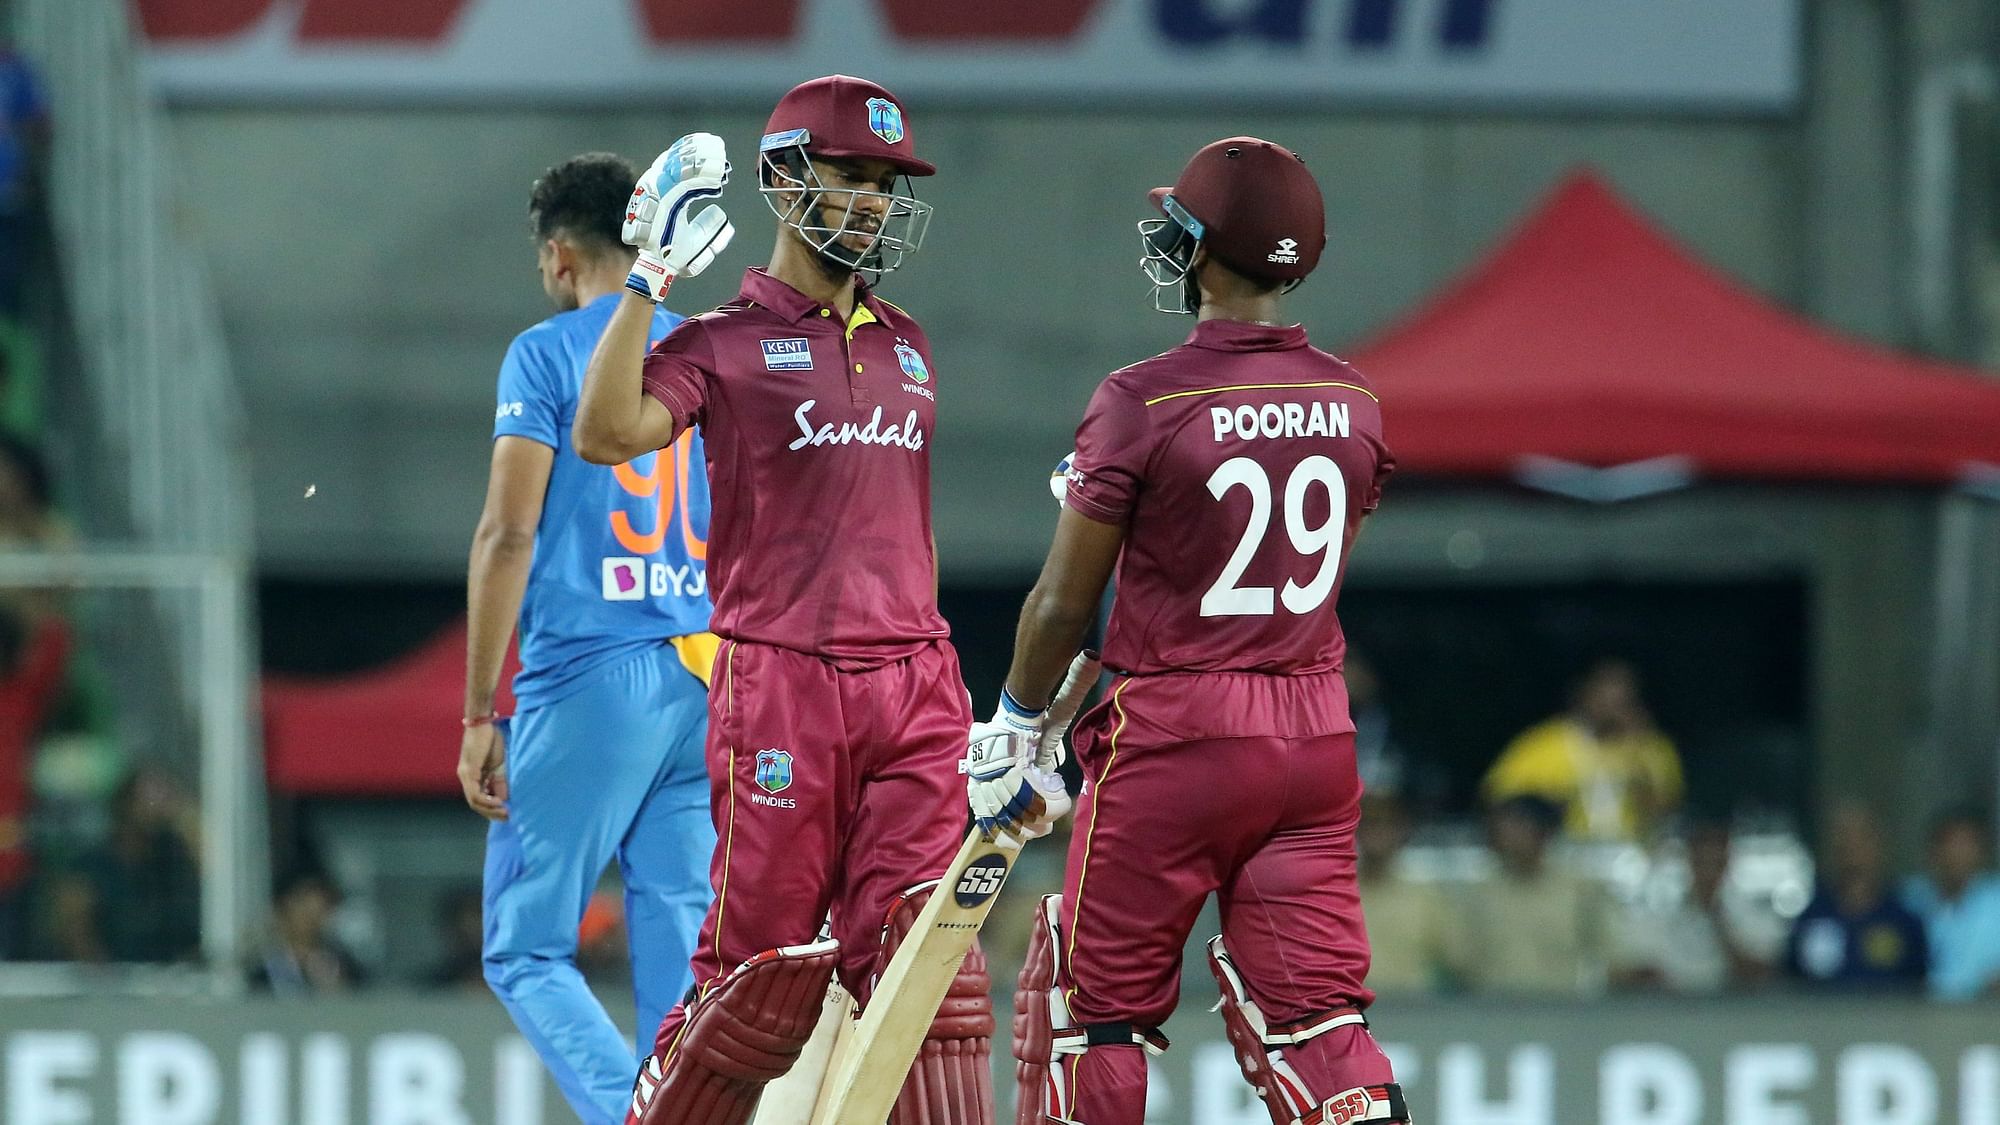 Chasing 171 to keep the series alive, West Indies reached their target with 9 balls to spare.